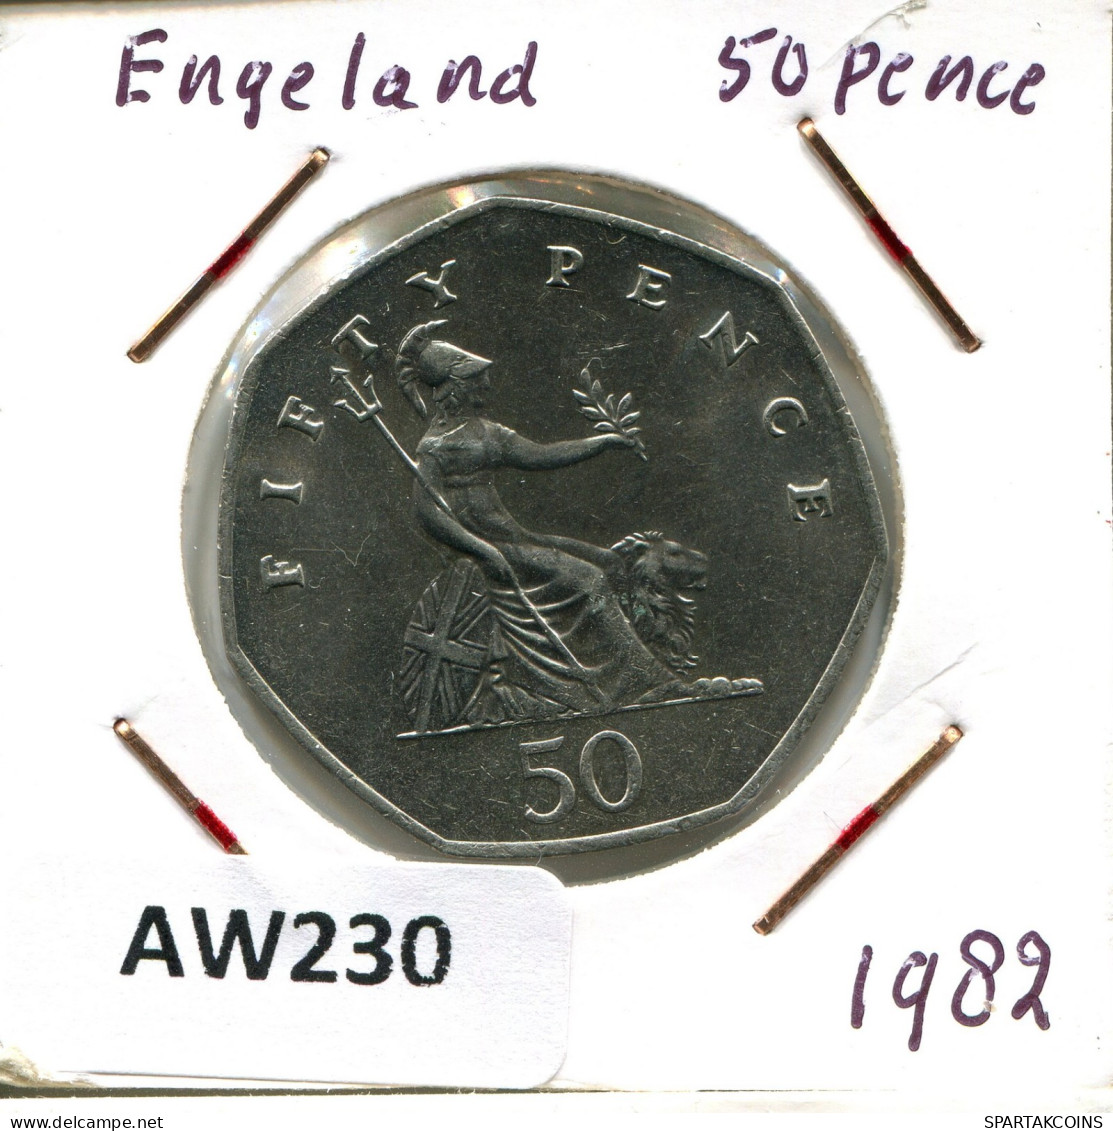 50 PENCE 1982 UK GREAT BRITAIN Coin #AW230.U.A - 50 Pence